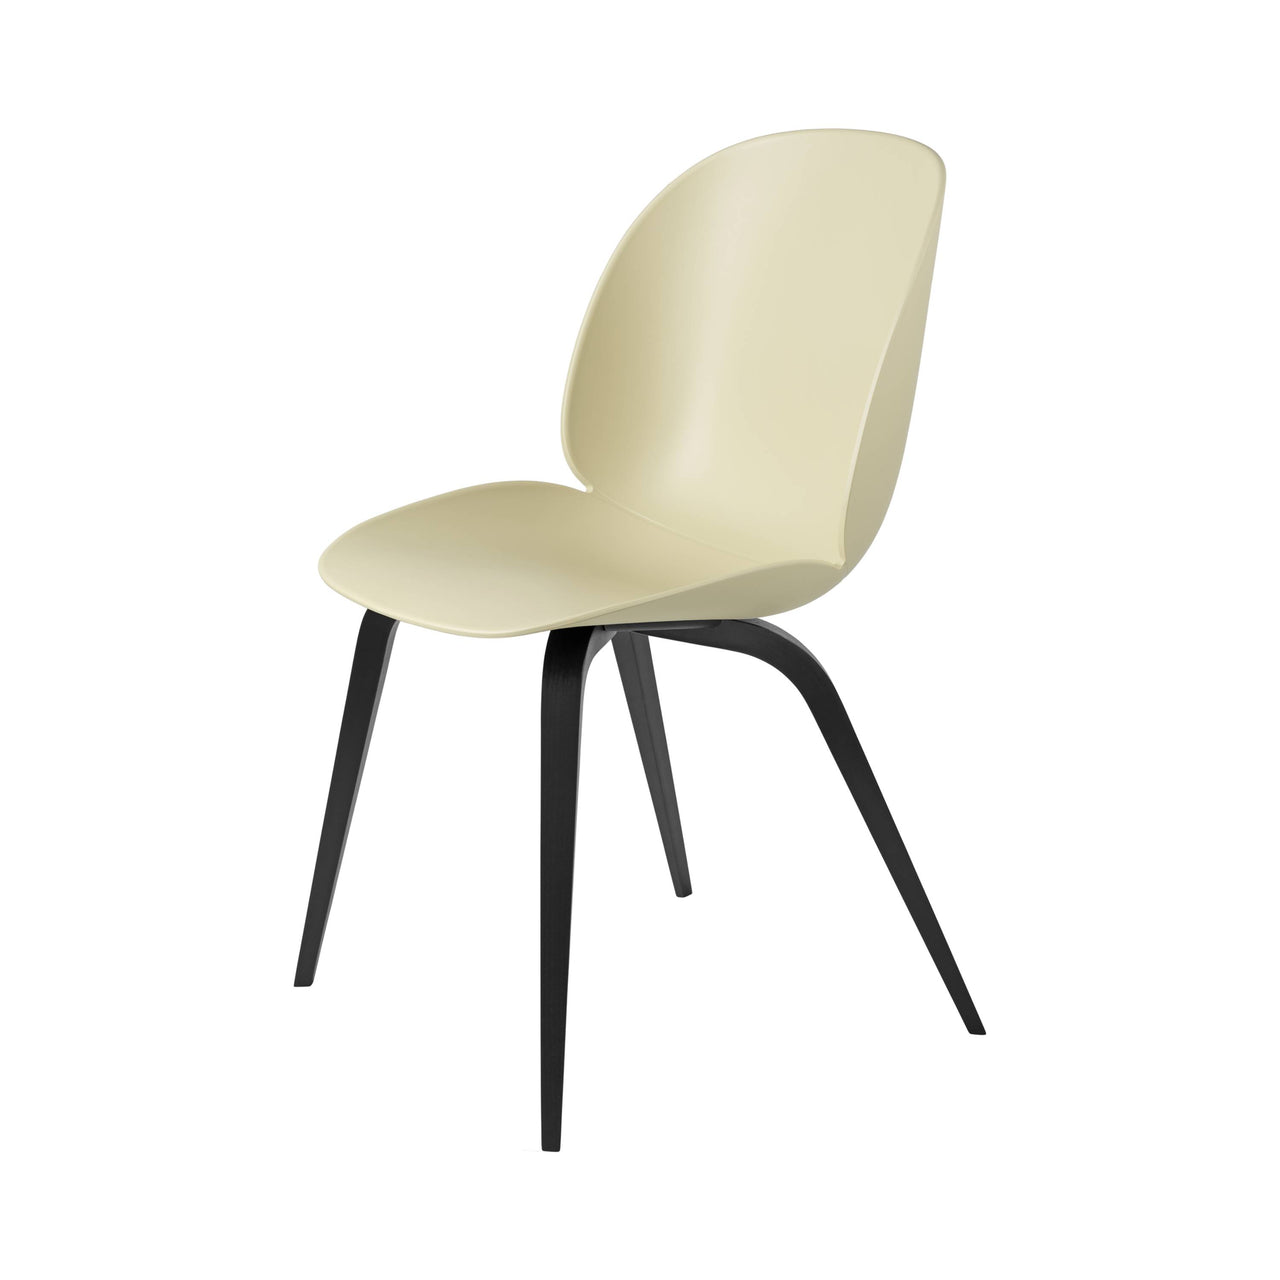 Beetle Dining Chair: Wood Base + Pastel Green + Black Stained Beech + Plastic Glides